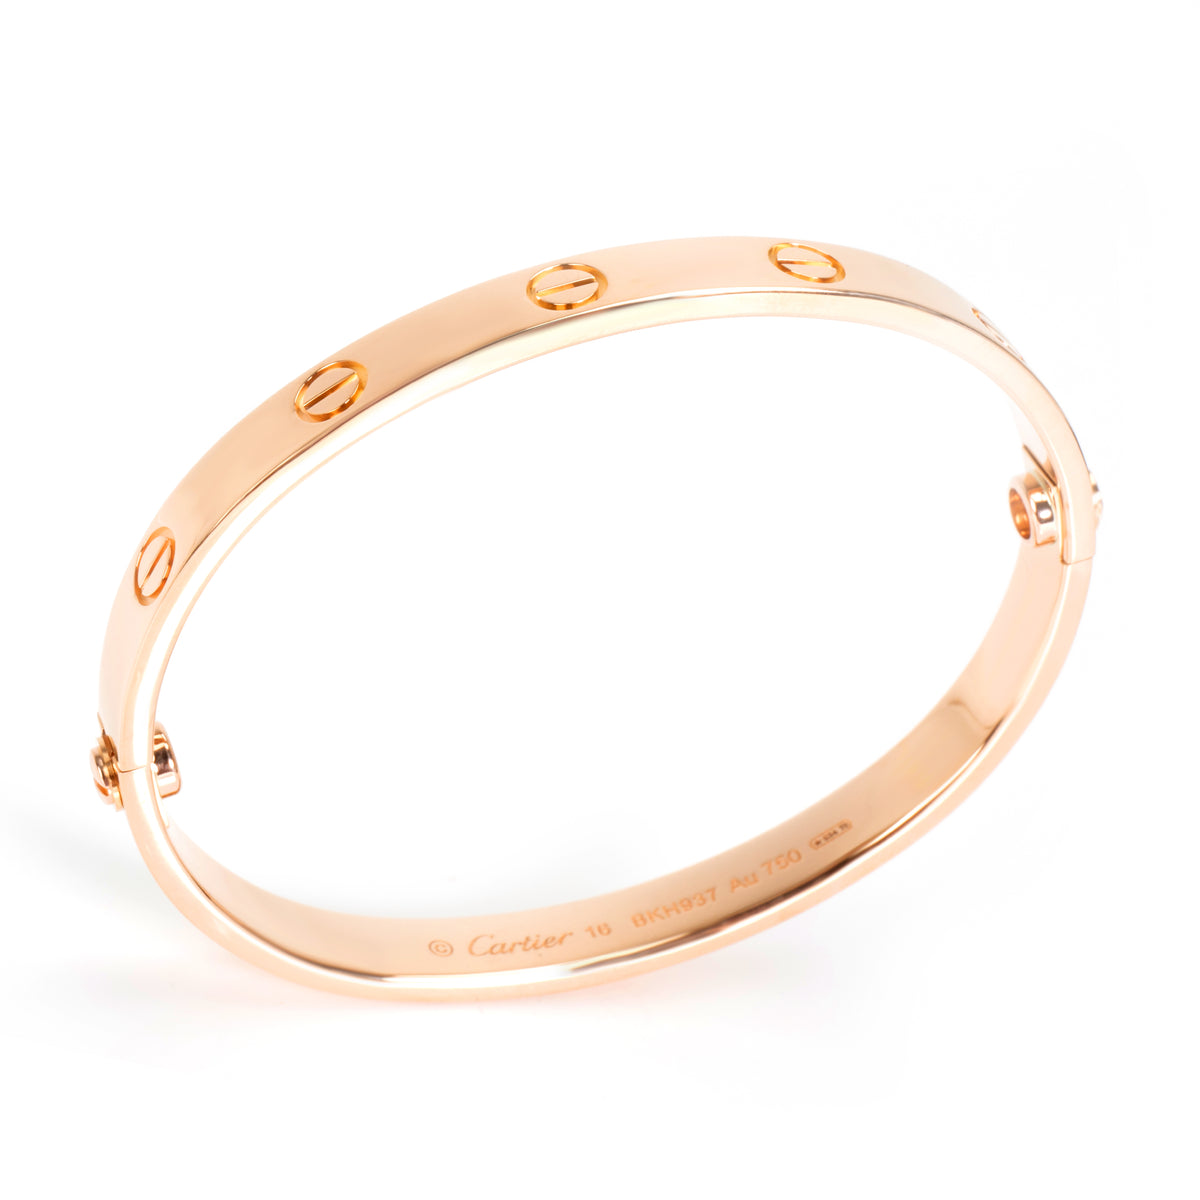 Cartier Love Bangle in 18KT Rose Gold Size 16